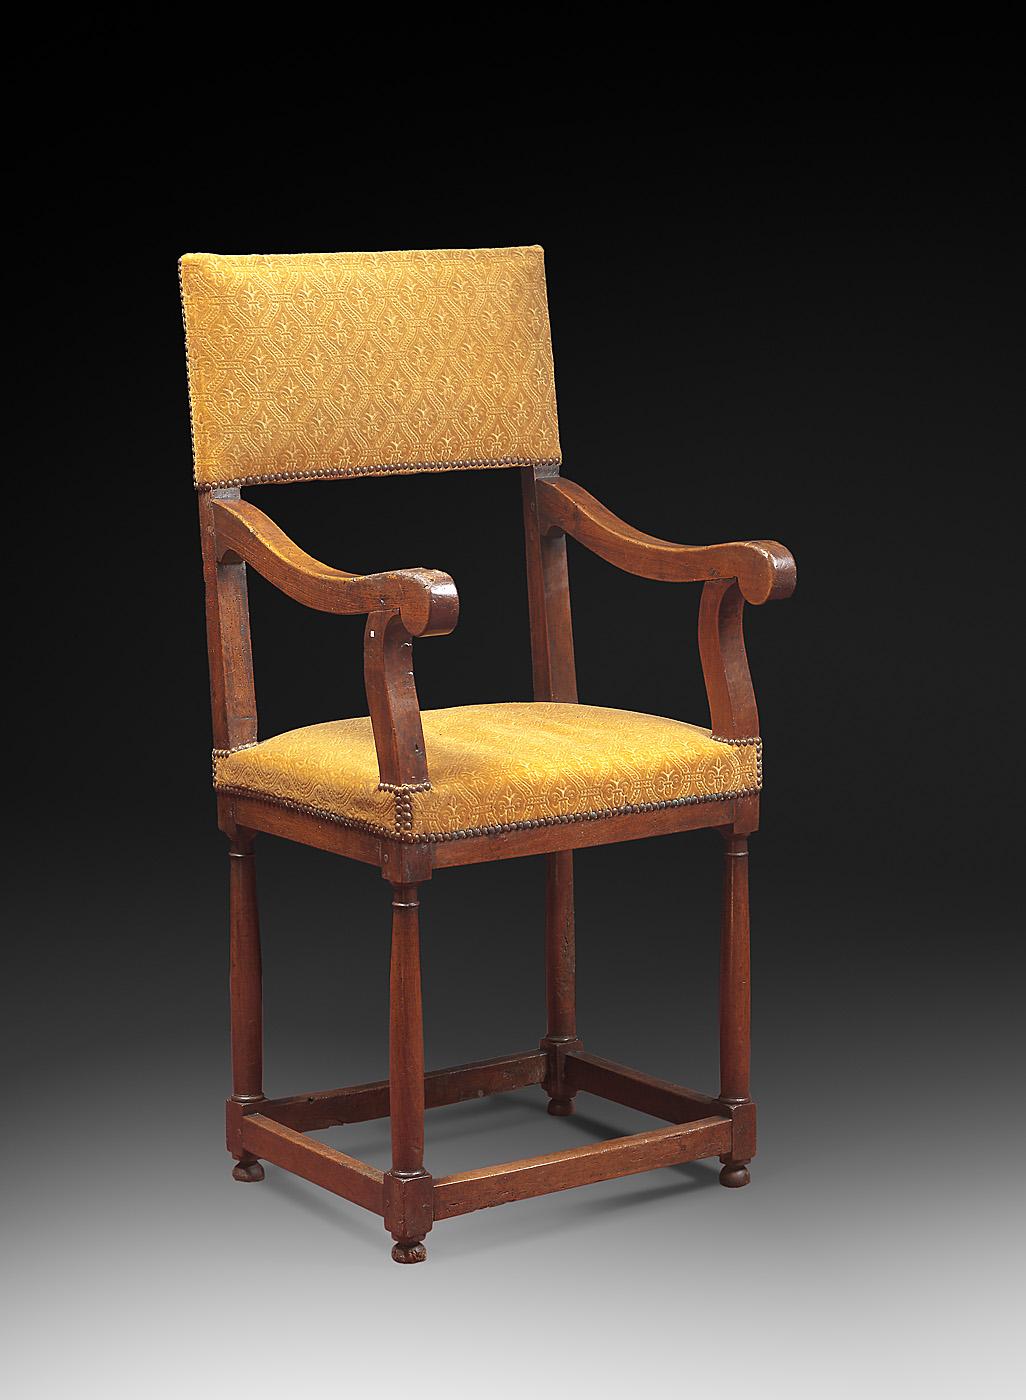 Origin: France
Period: Second half of the 16th century, Henri II 

Measures: Height 119 cm
Seat height 58 cm 
Length 55 cm
Depth 51.5 cm
 
Walnut wood

Good condition

Yellow raised velvet 


This armchair stands on four Doric columns